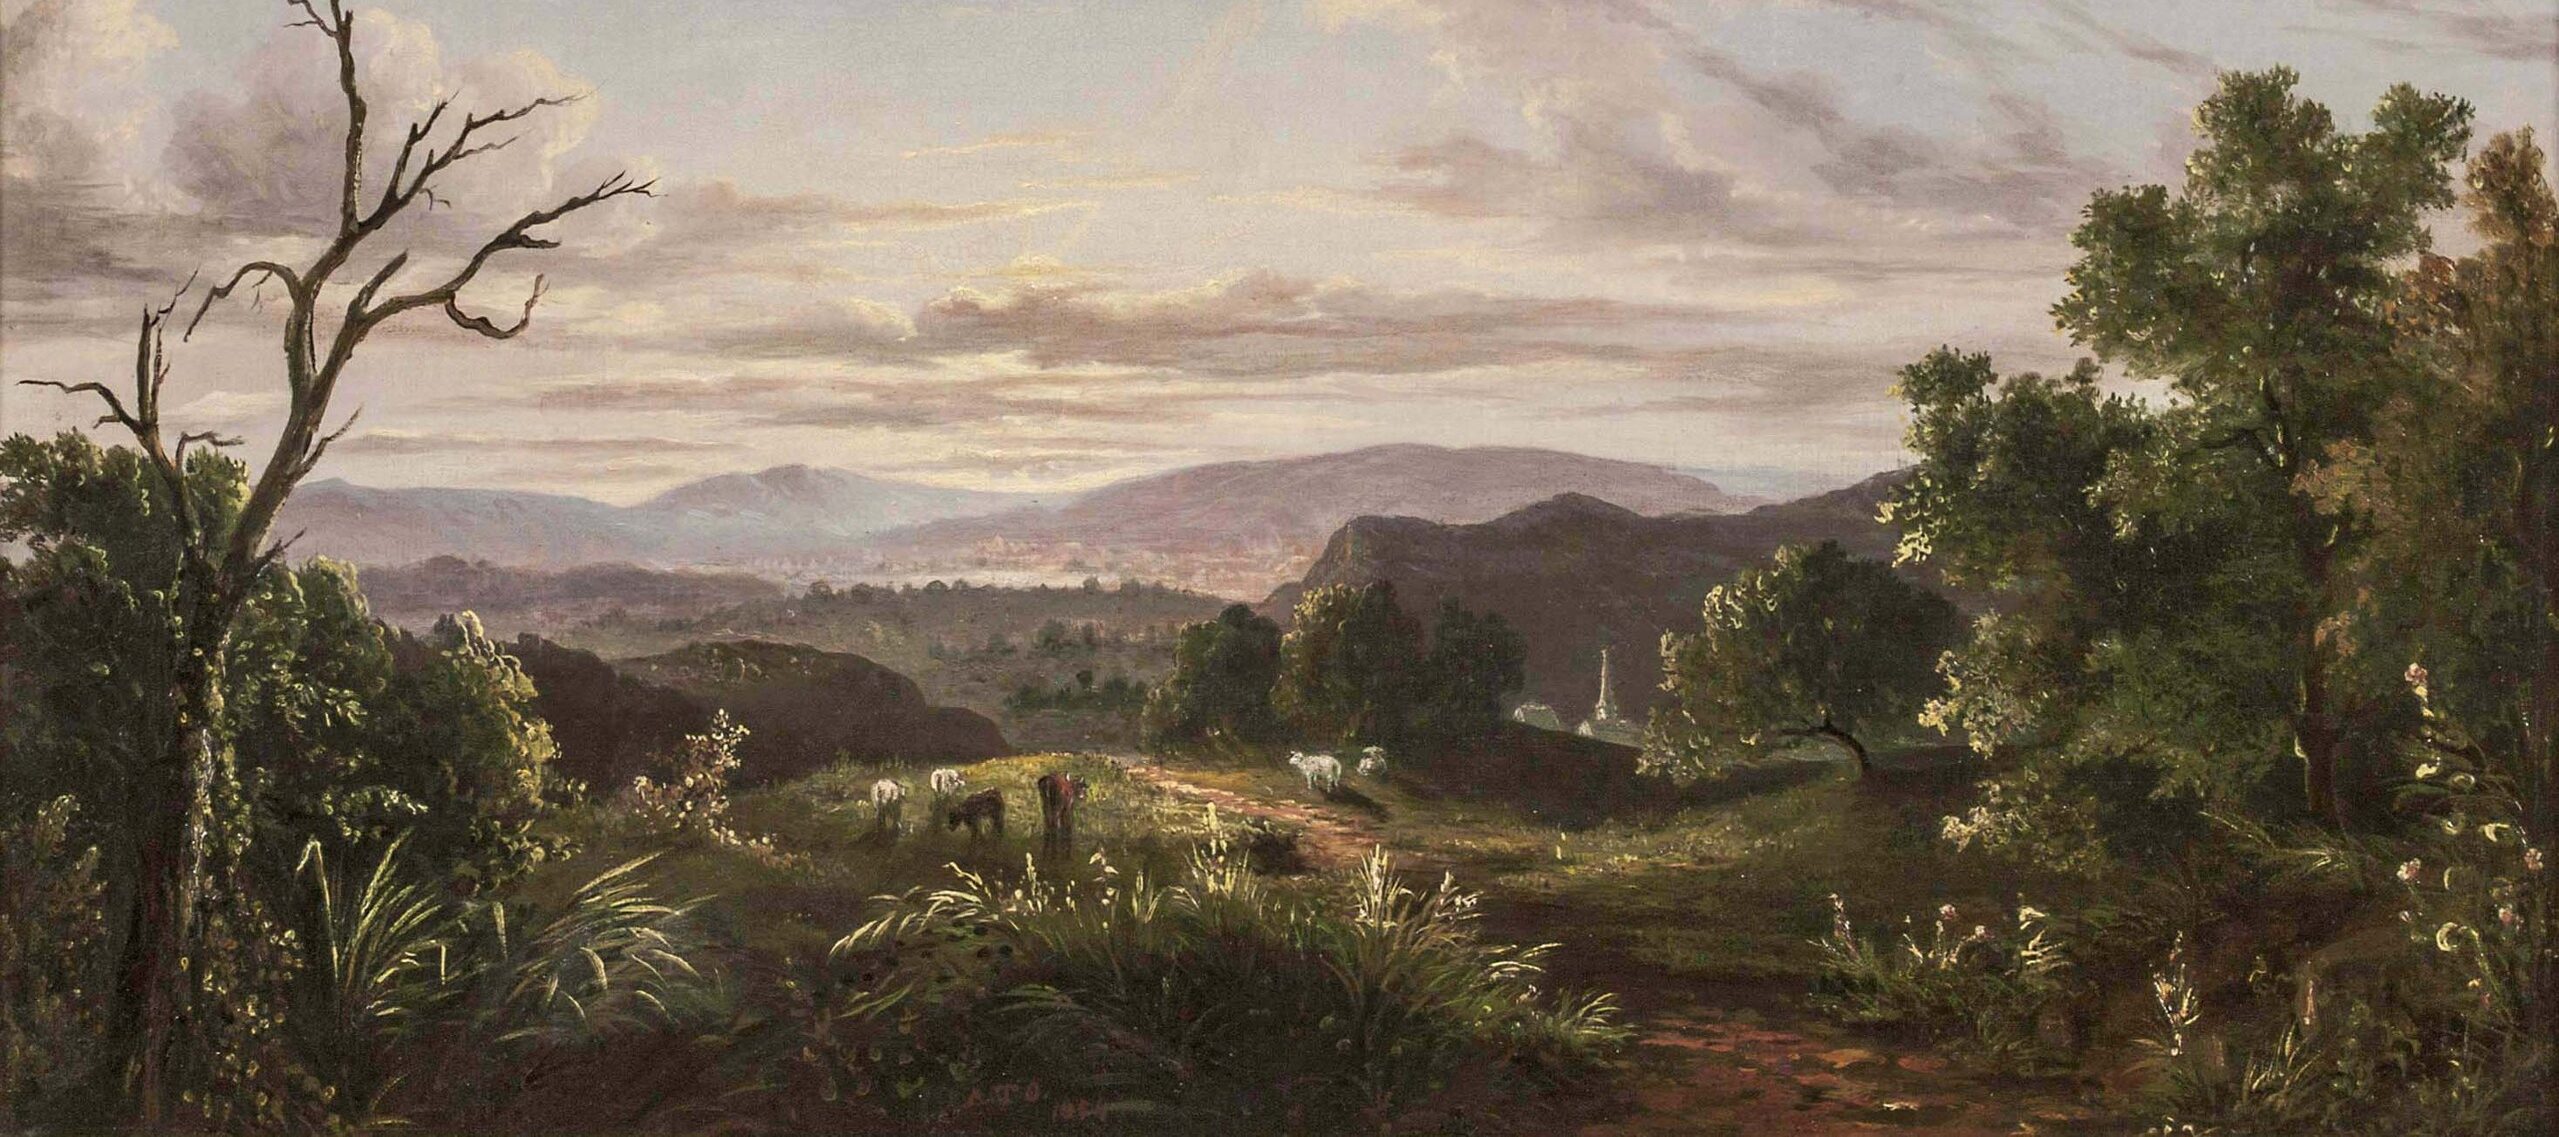 Livestock graze along a path cutting through a vast landscape of green, rolling hills covered in trees. The path leads into the mountainous distance, where more foliage and a few building tops are visible. The expansive, pale blue sky is tinged with pink and purple, with white clouds.